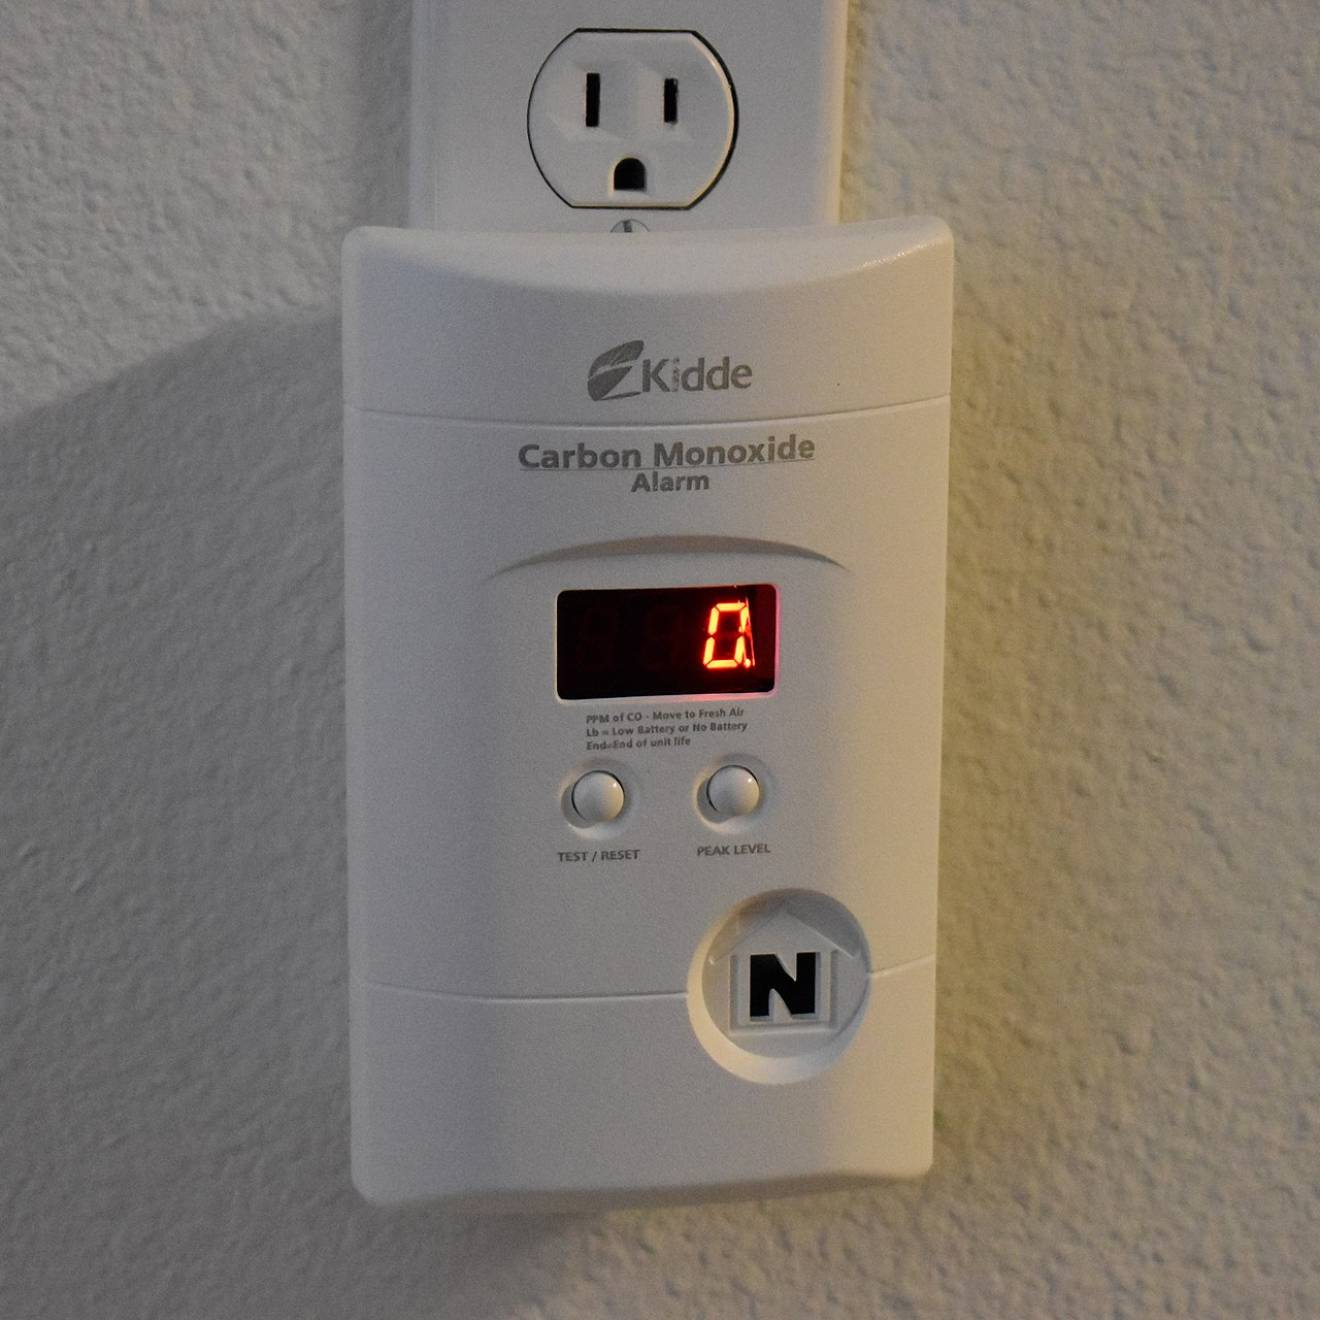 Carbon monoxide detector plugged into a wall outlet